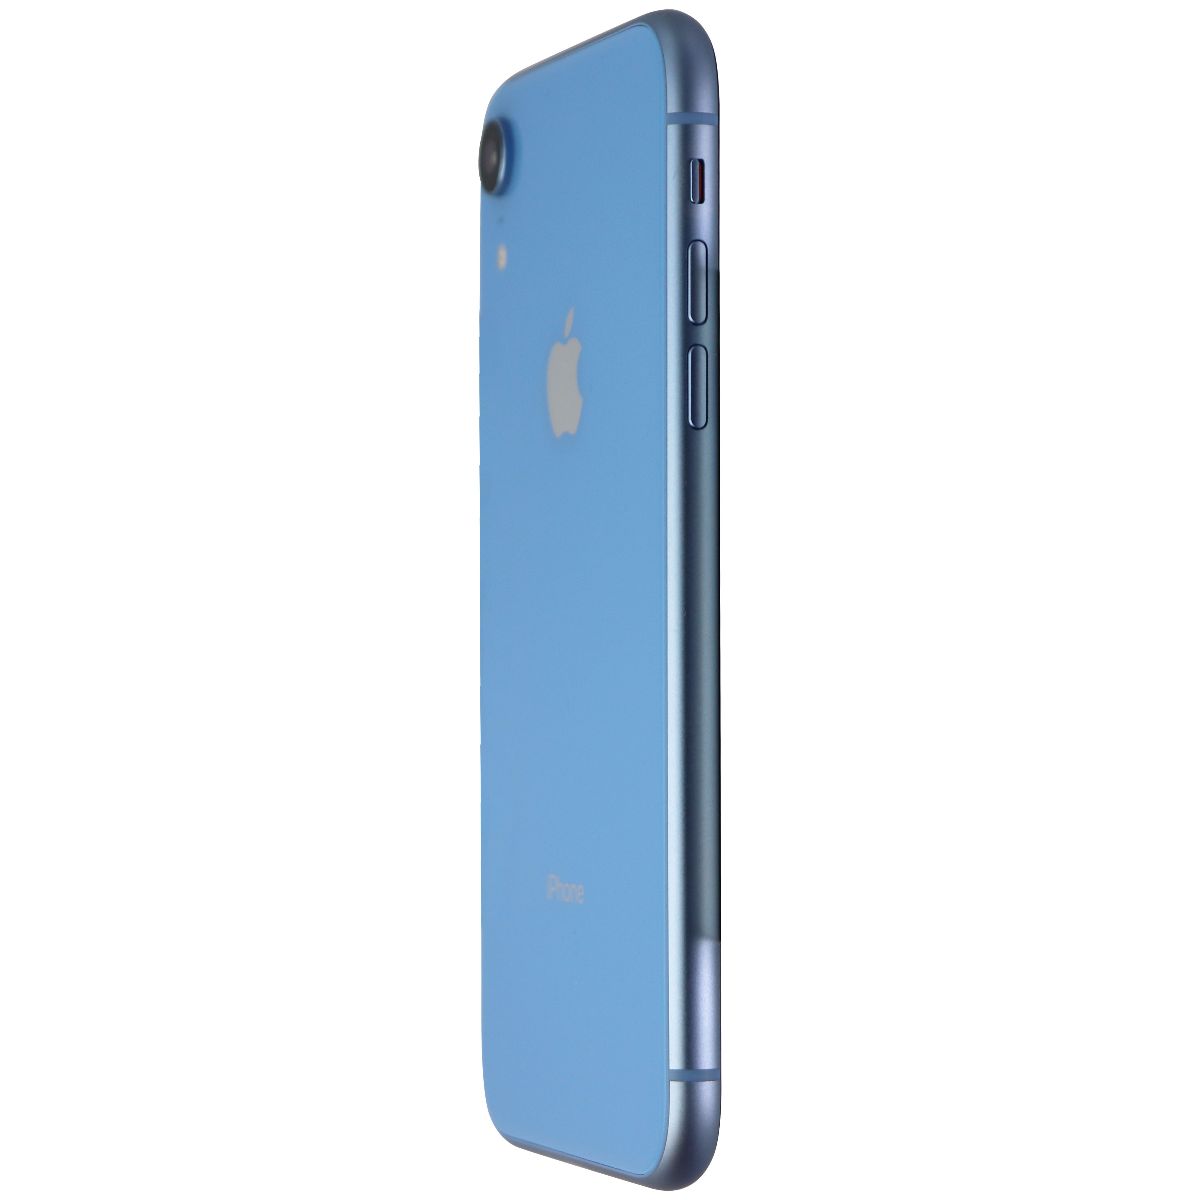 Apple iPhone XR (6.1-inch) (A1984) Unlocked - 64GB / Blue - Bad Face ID* Cell Phones & Smartphones Apple    - Simple Cell Bulk Wholesale Pricing - USA Seller